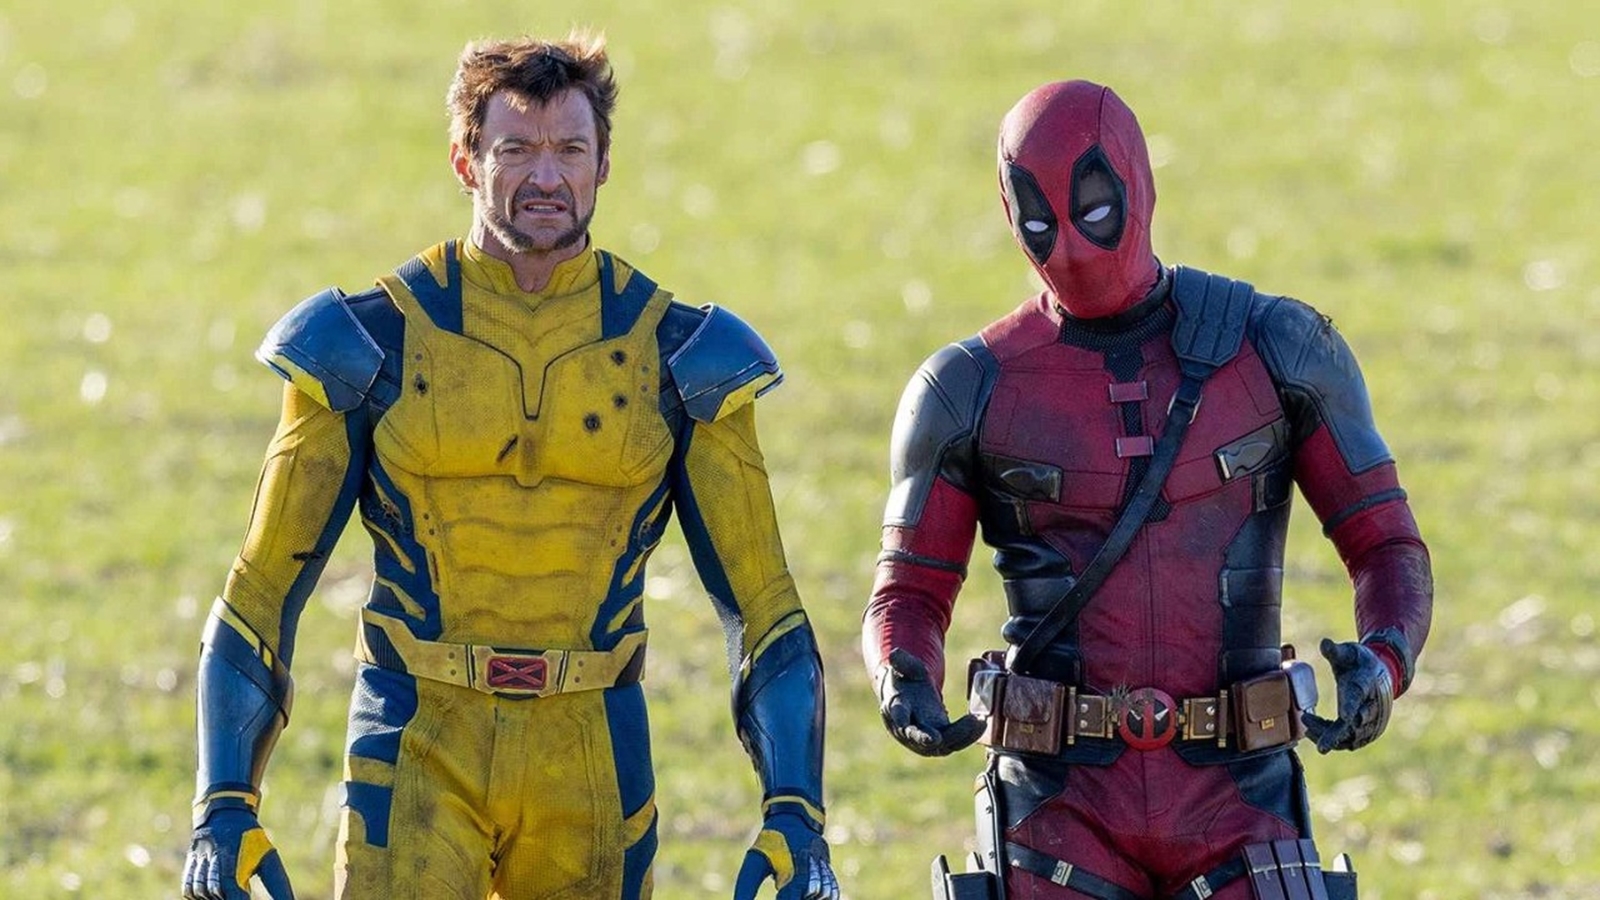 indianexpress.com - Entertainment Desk - Deadpool and Wolverine box office collection day 1: Ryan Reynolds and Hugh Jackman deliver sixth-biggest Hollywood opening in India